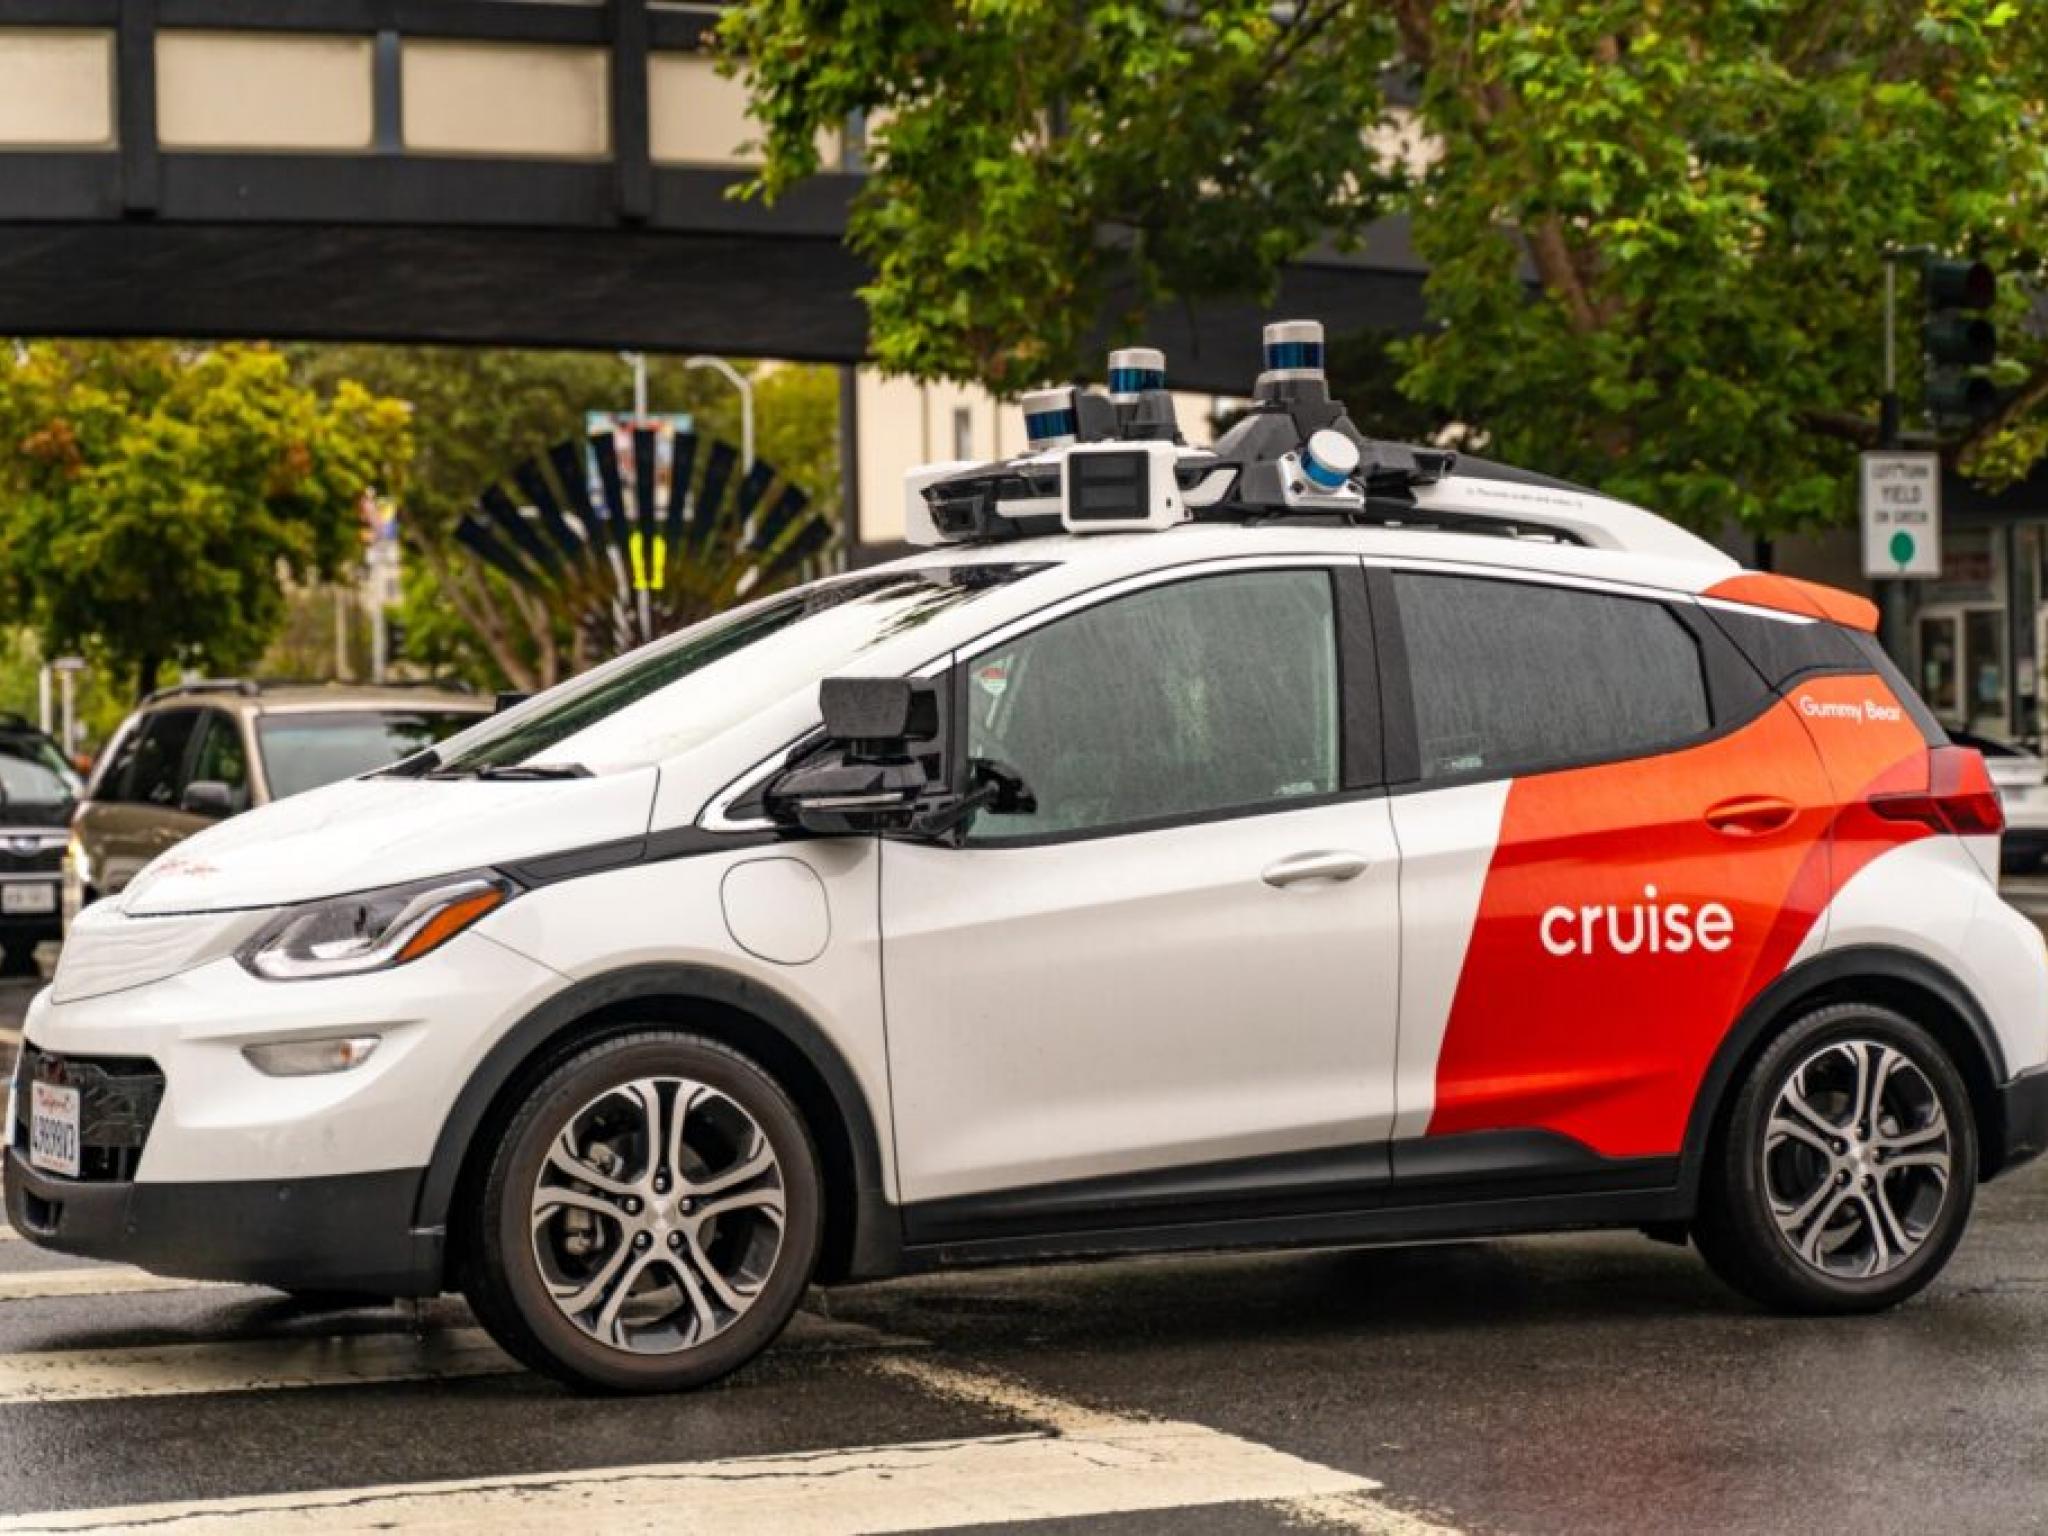  gms-cruise-fined-112500-by-california-over-self-driving-car-crash-report 